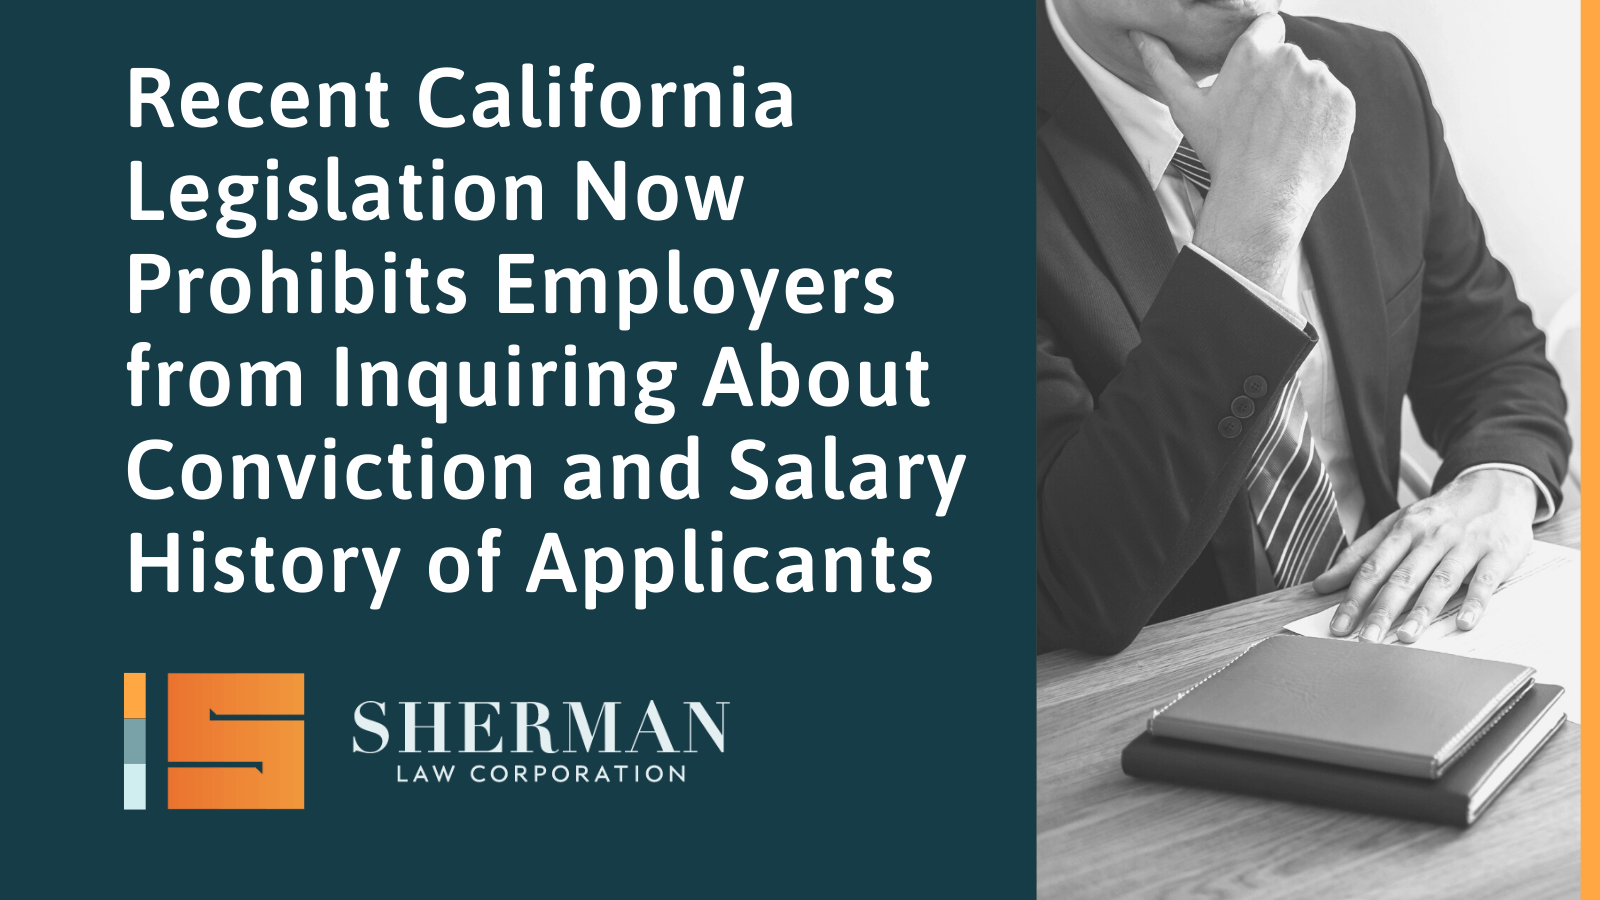 Recent California Legislation Now Prohibits Employers from Inquiring About Conviction and Salary History of Applicants- A Brief Case Study - sherman law corporation